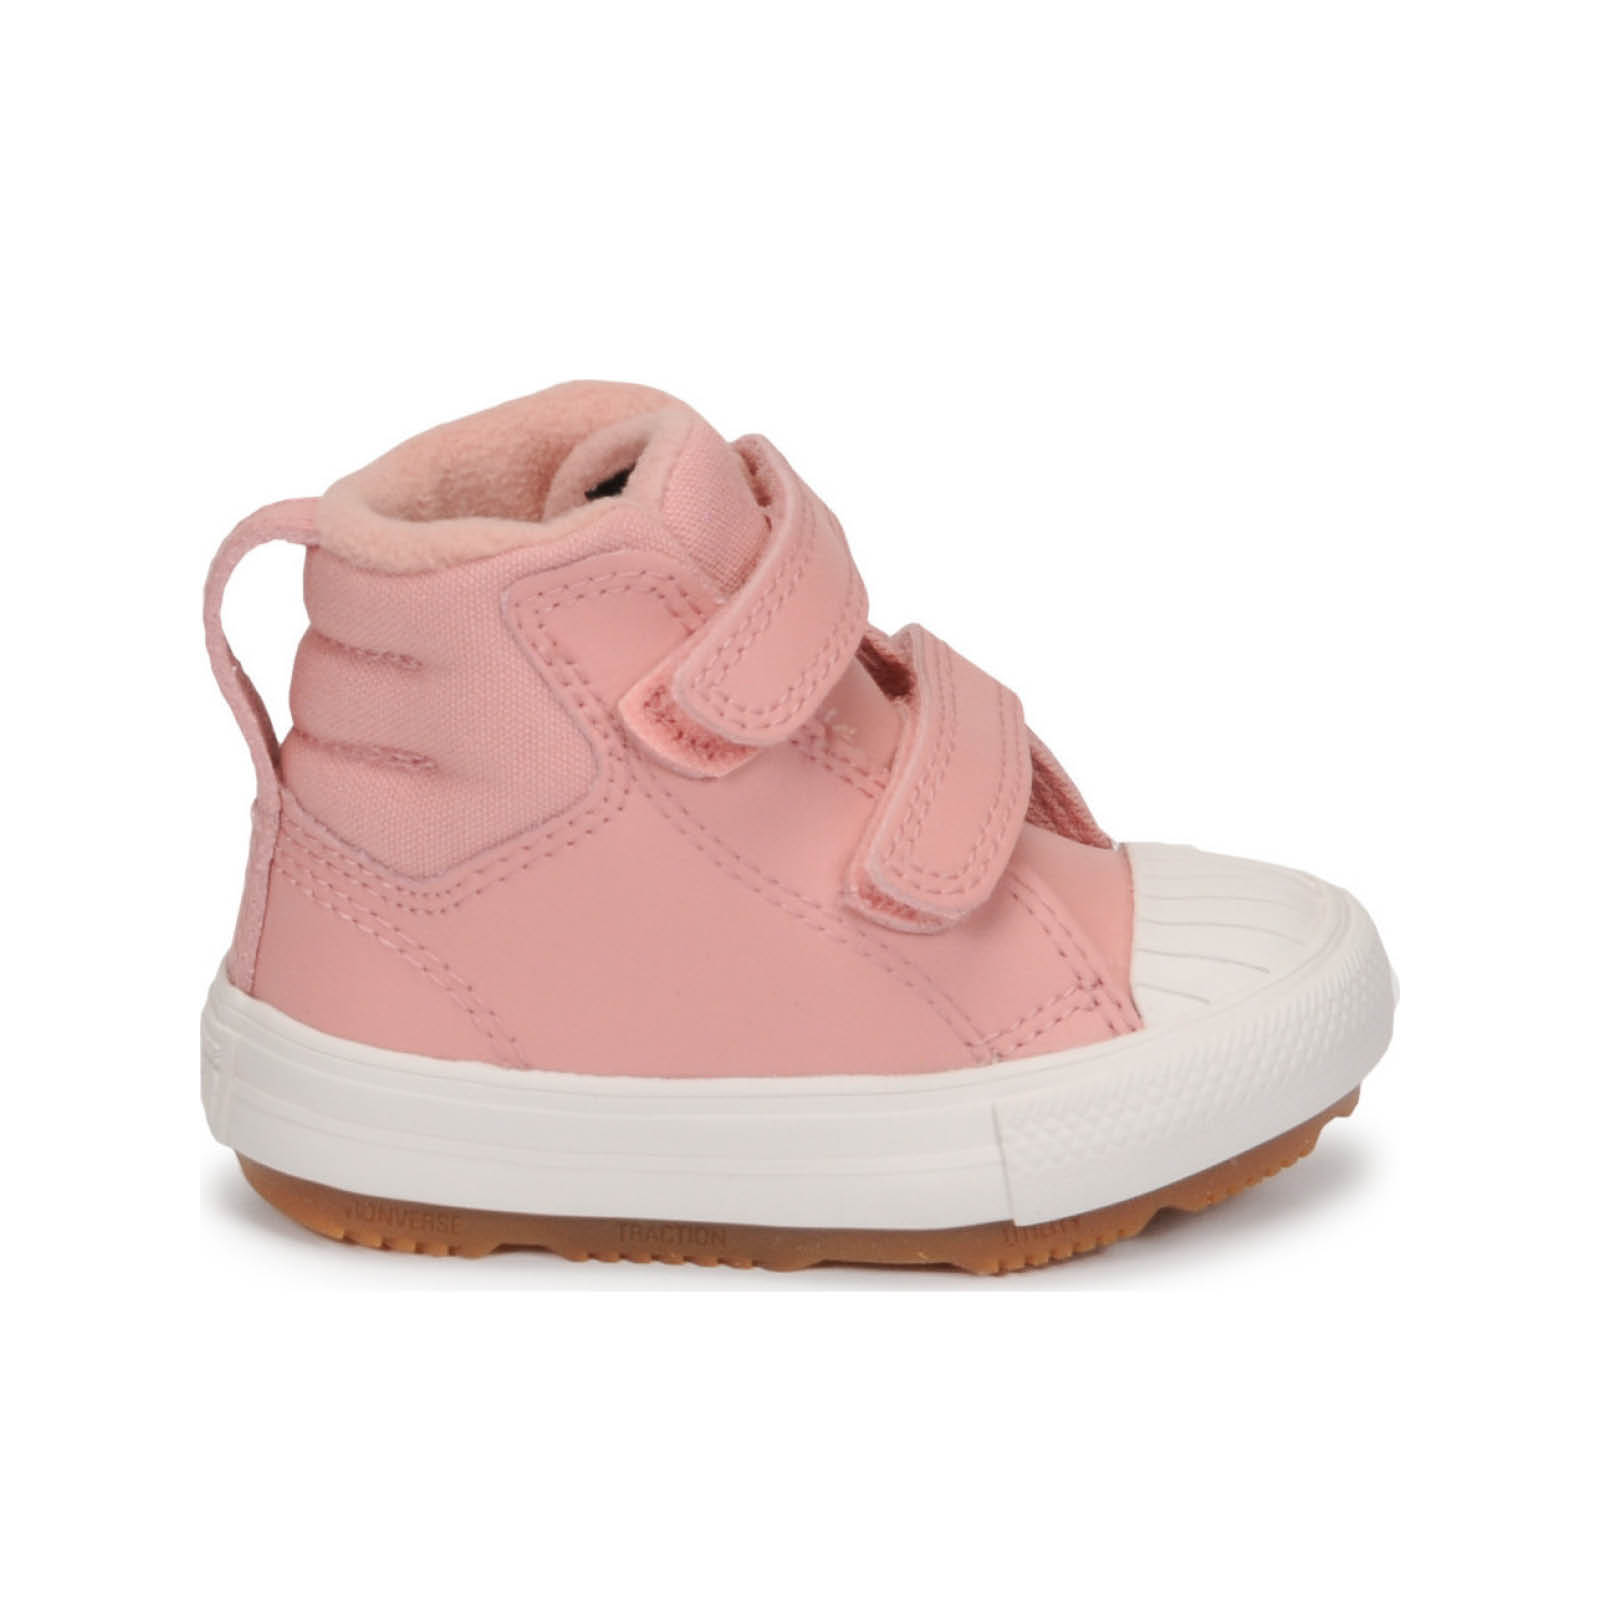 Converse - CHUCK TAYLOR ALL STAR BERKSHIRE BOOT - 668-RUST PINK/RUST PINK/PALE PUTTY Παιδικά > Παπούτσια > Sneaker > Μποτάκι High Cut